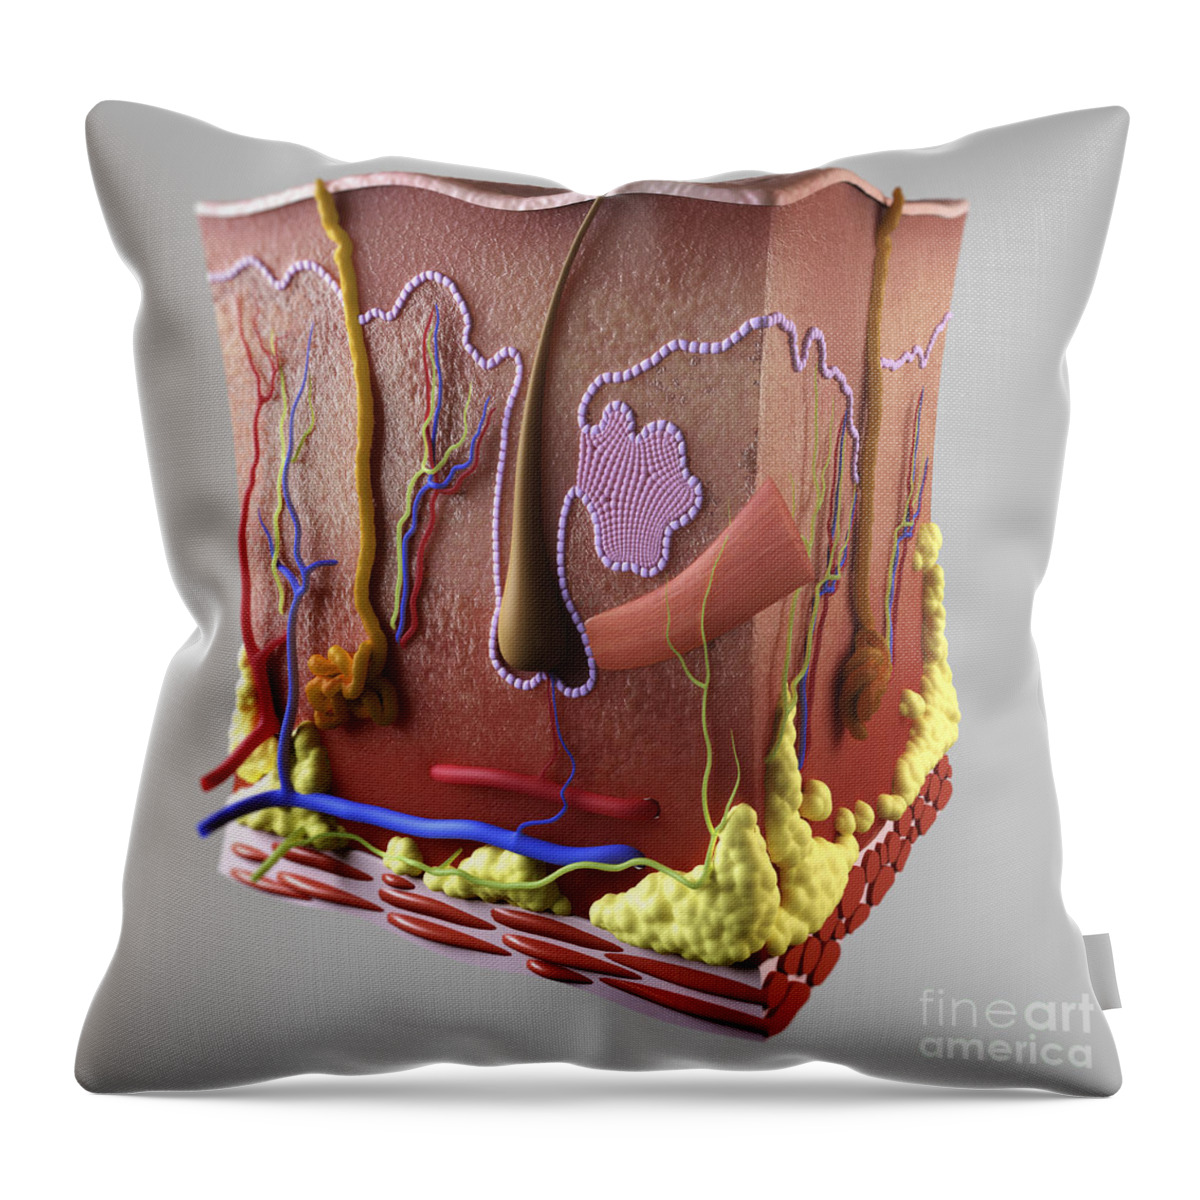 Biomedical Illustration Throw Pillow featuring the photograph Anatomy Of Human Skin #11 by Science Picture Co